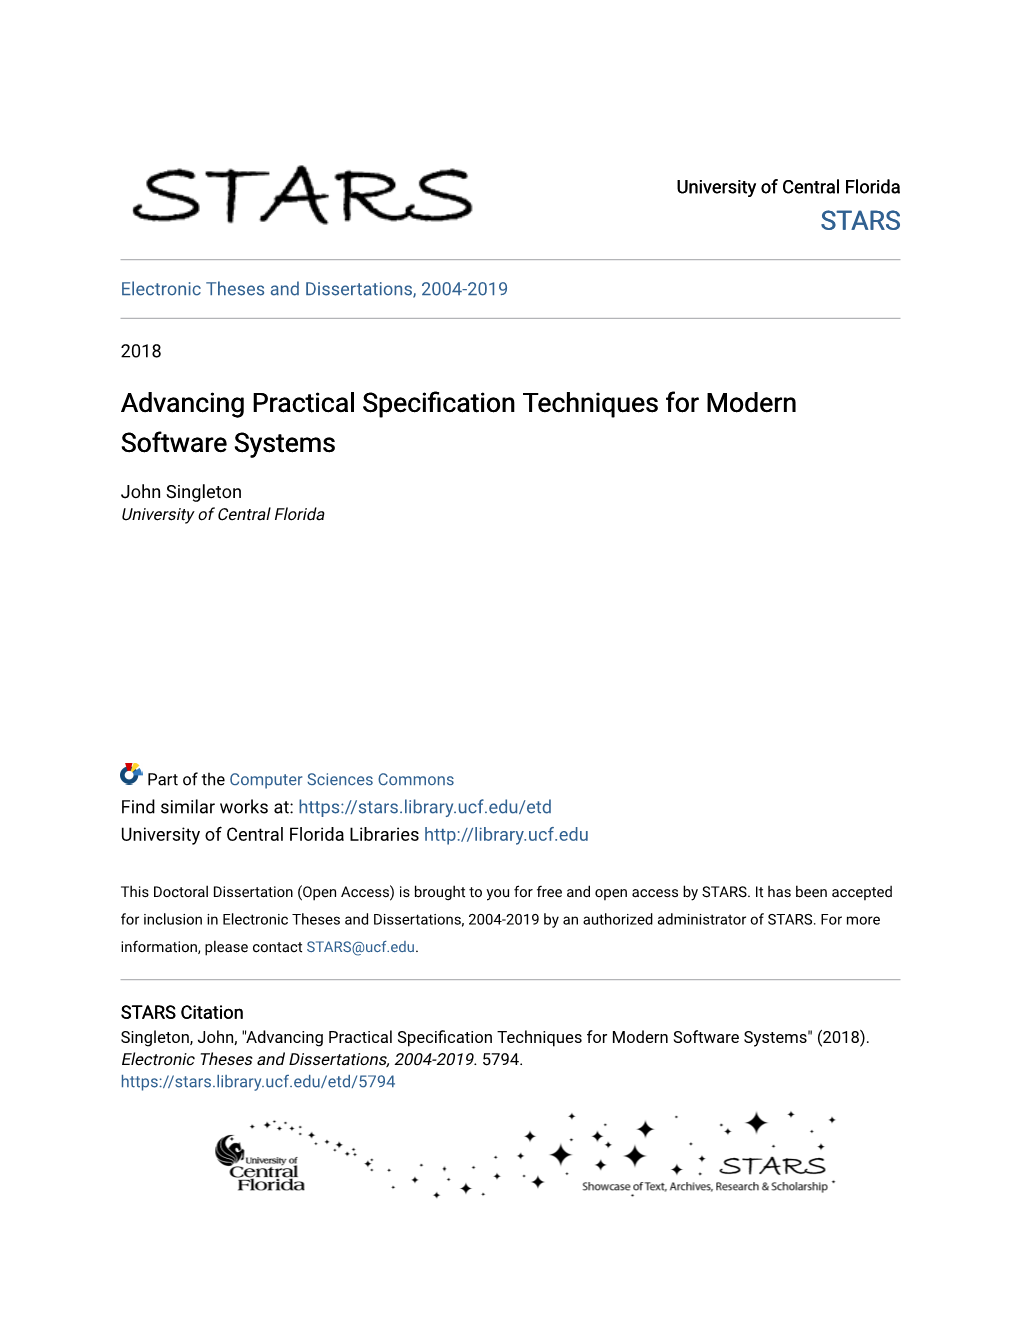 Advancing Practical Specification Techniques for Modern Software Systems